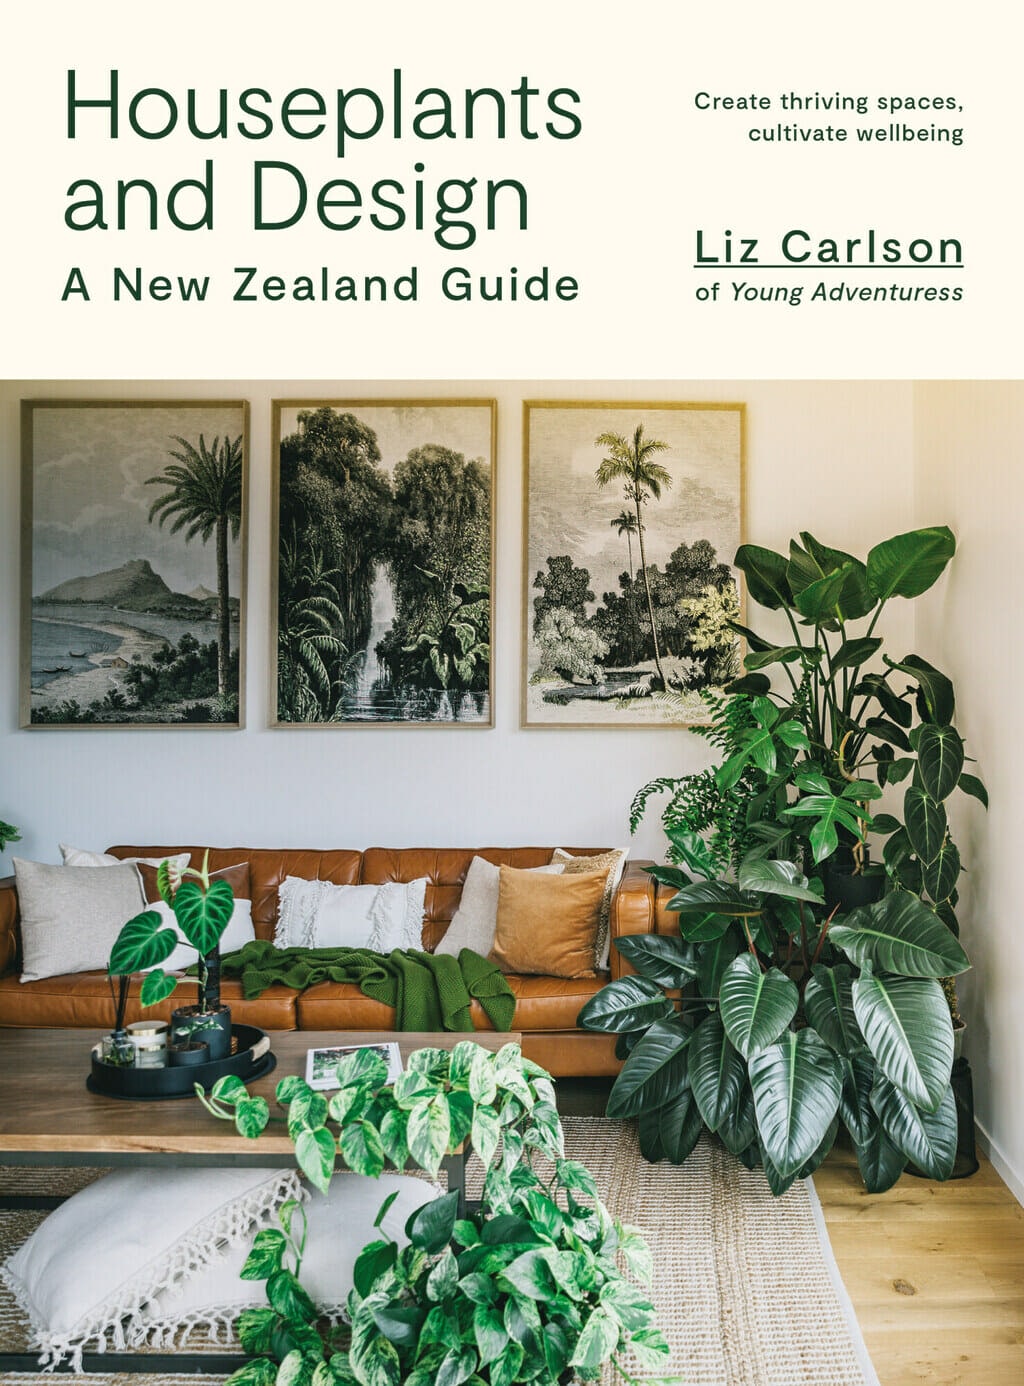 Houseplants and Design: A New Zealand Guide by Liz Carlson book cover. 